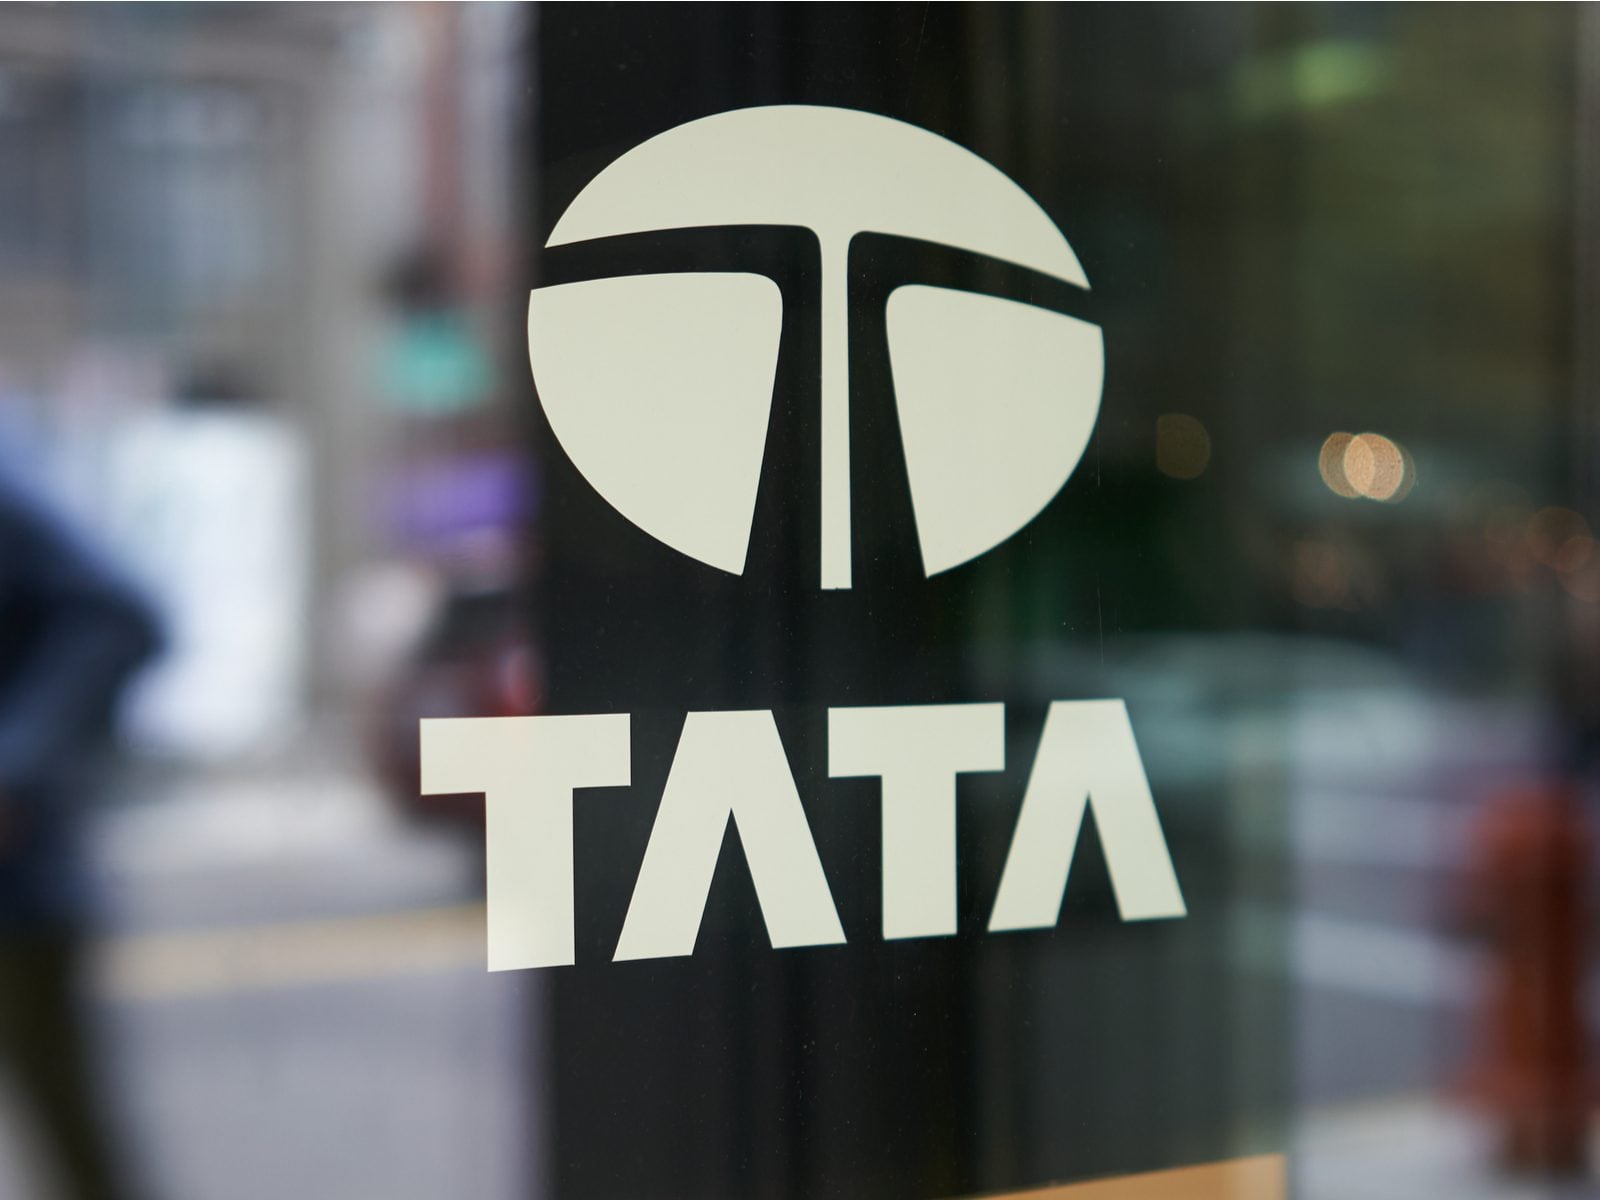 Boost for Auto Sector Likely as Tata Sets Up Business for Semiconductor Industry - News18